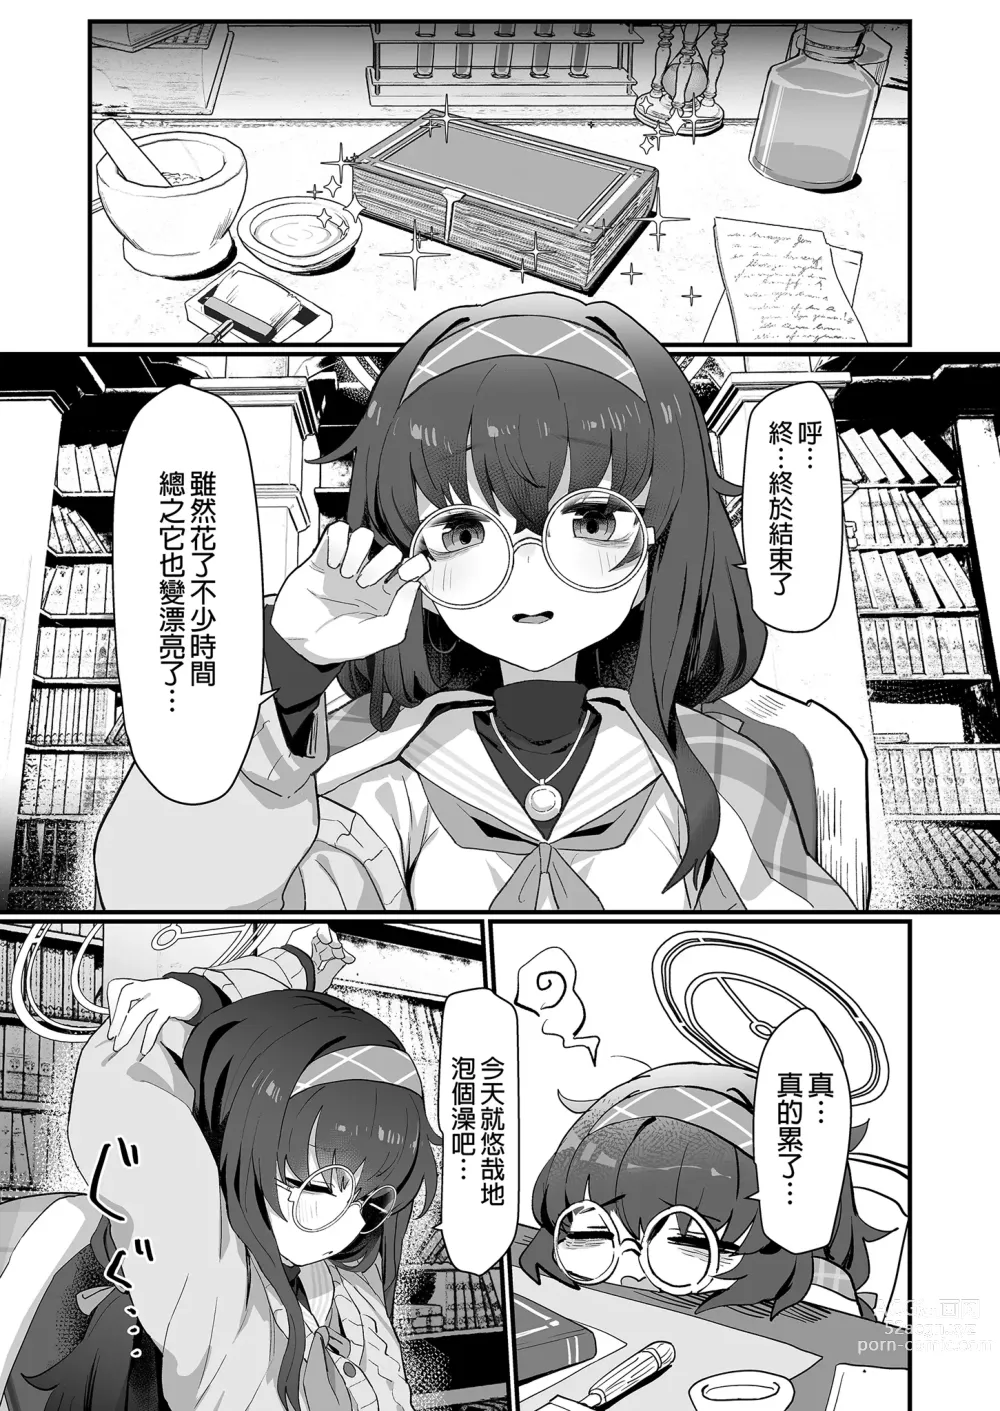 Page 3 of doujinshi 古書館願望清單 (decensored)